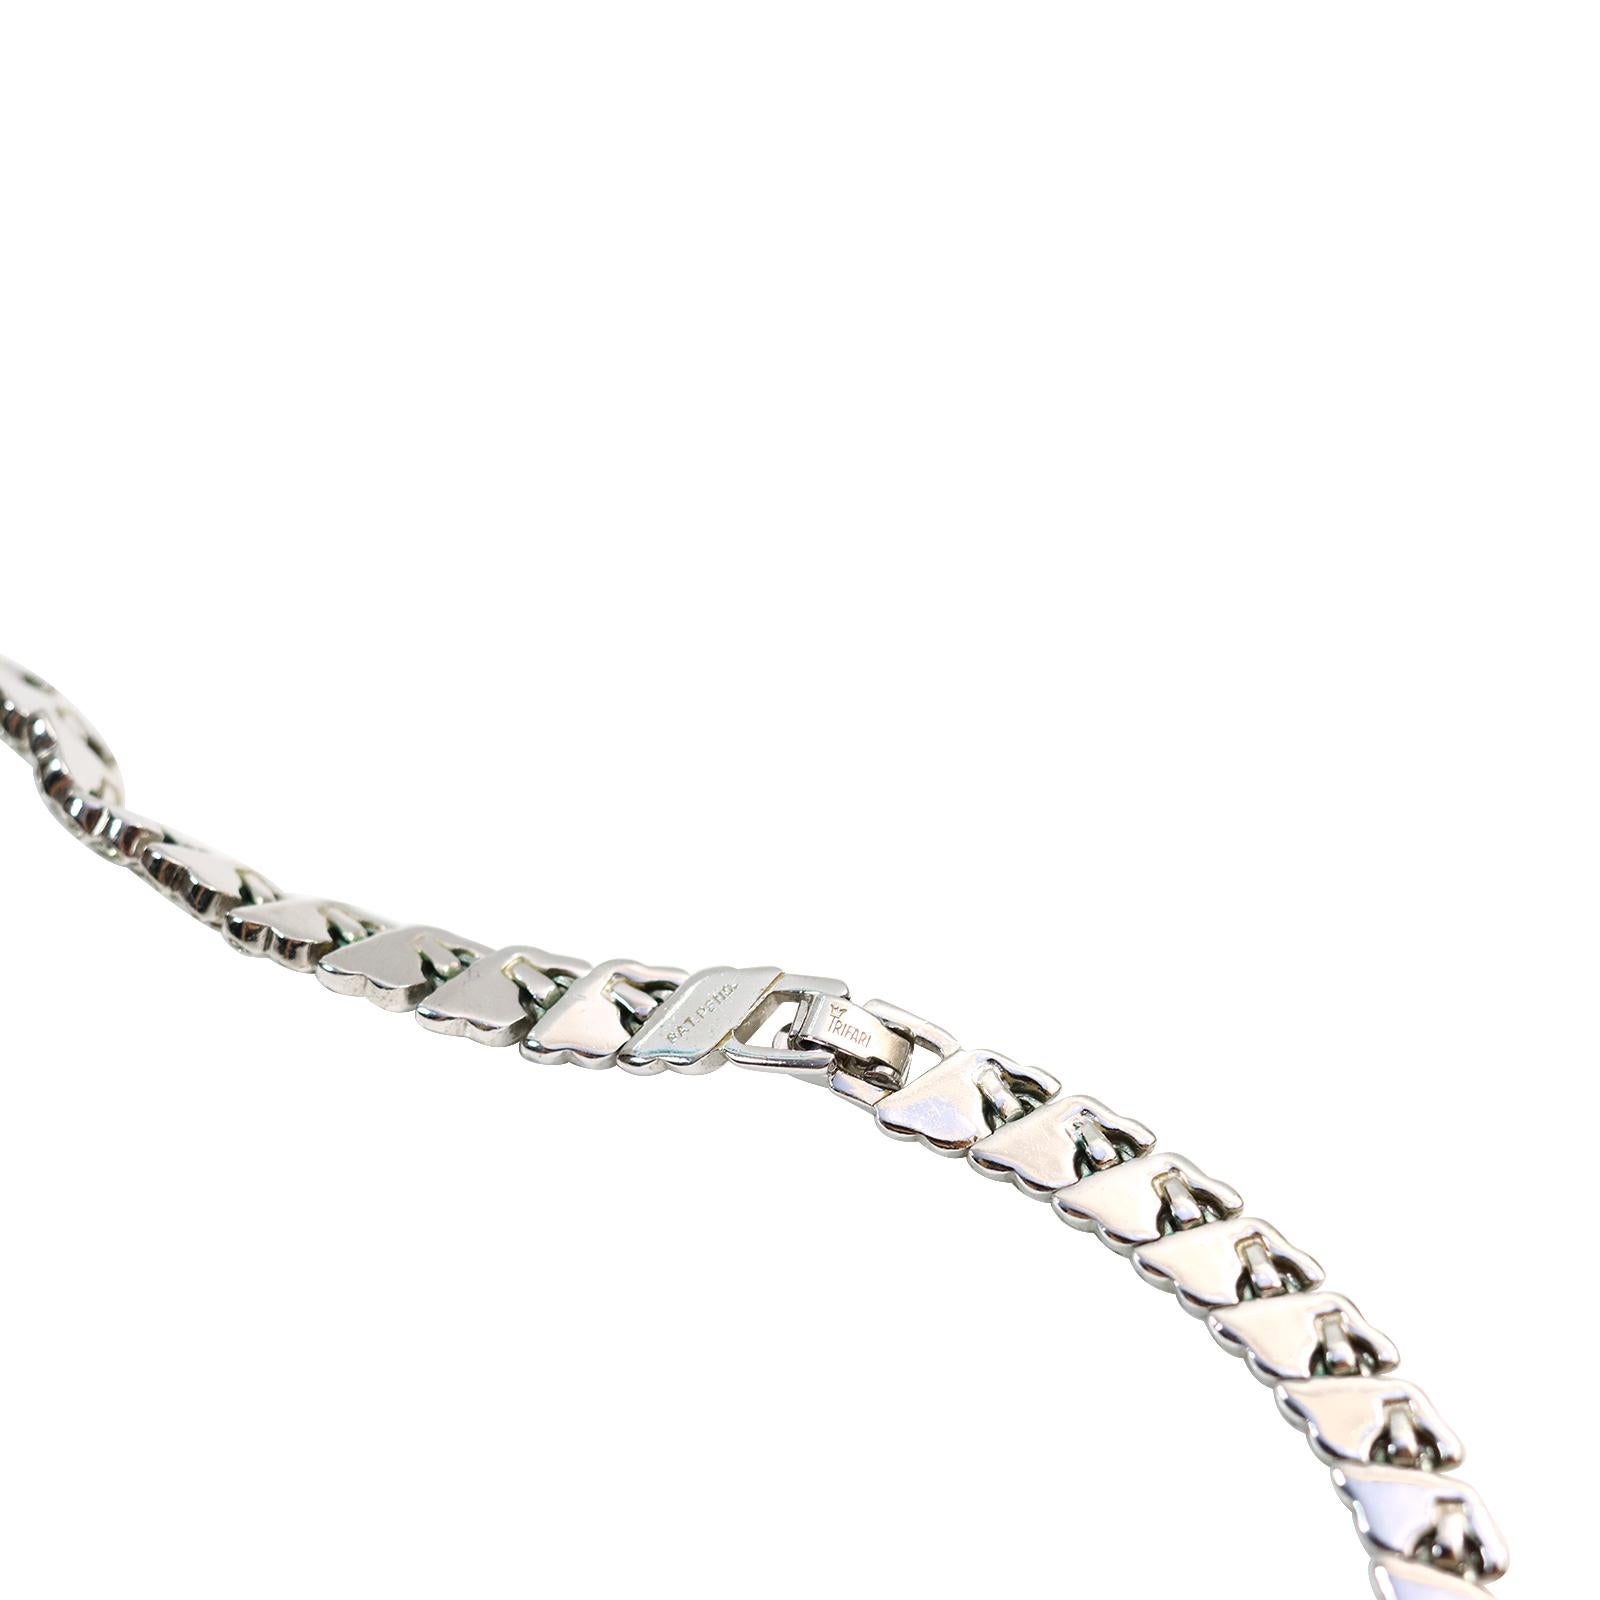 Vintage Trifari Baguette Tennis Necklace Choker circa 1960s In Good Condition For Sale In New York, NY